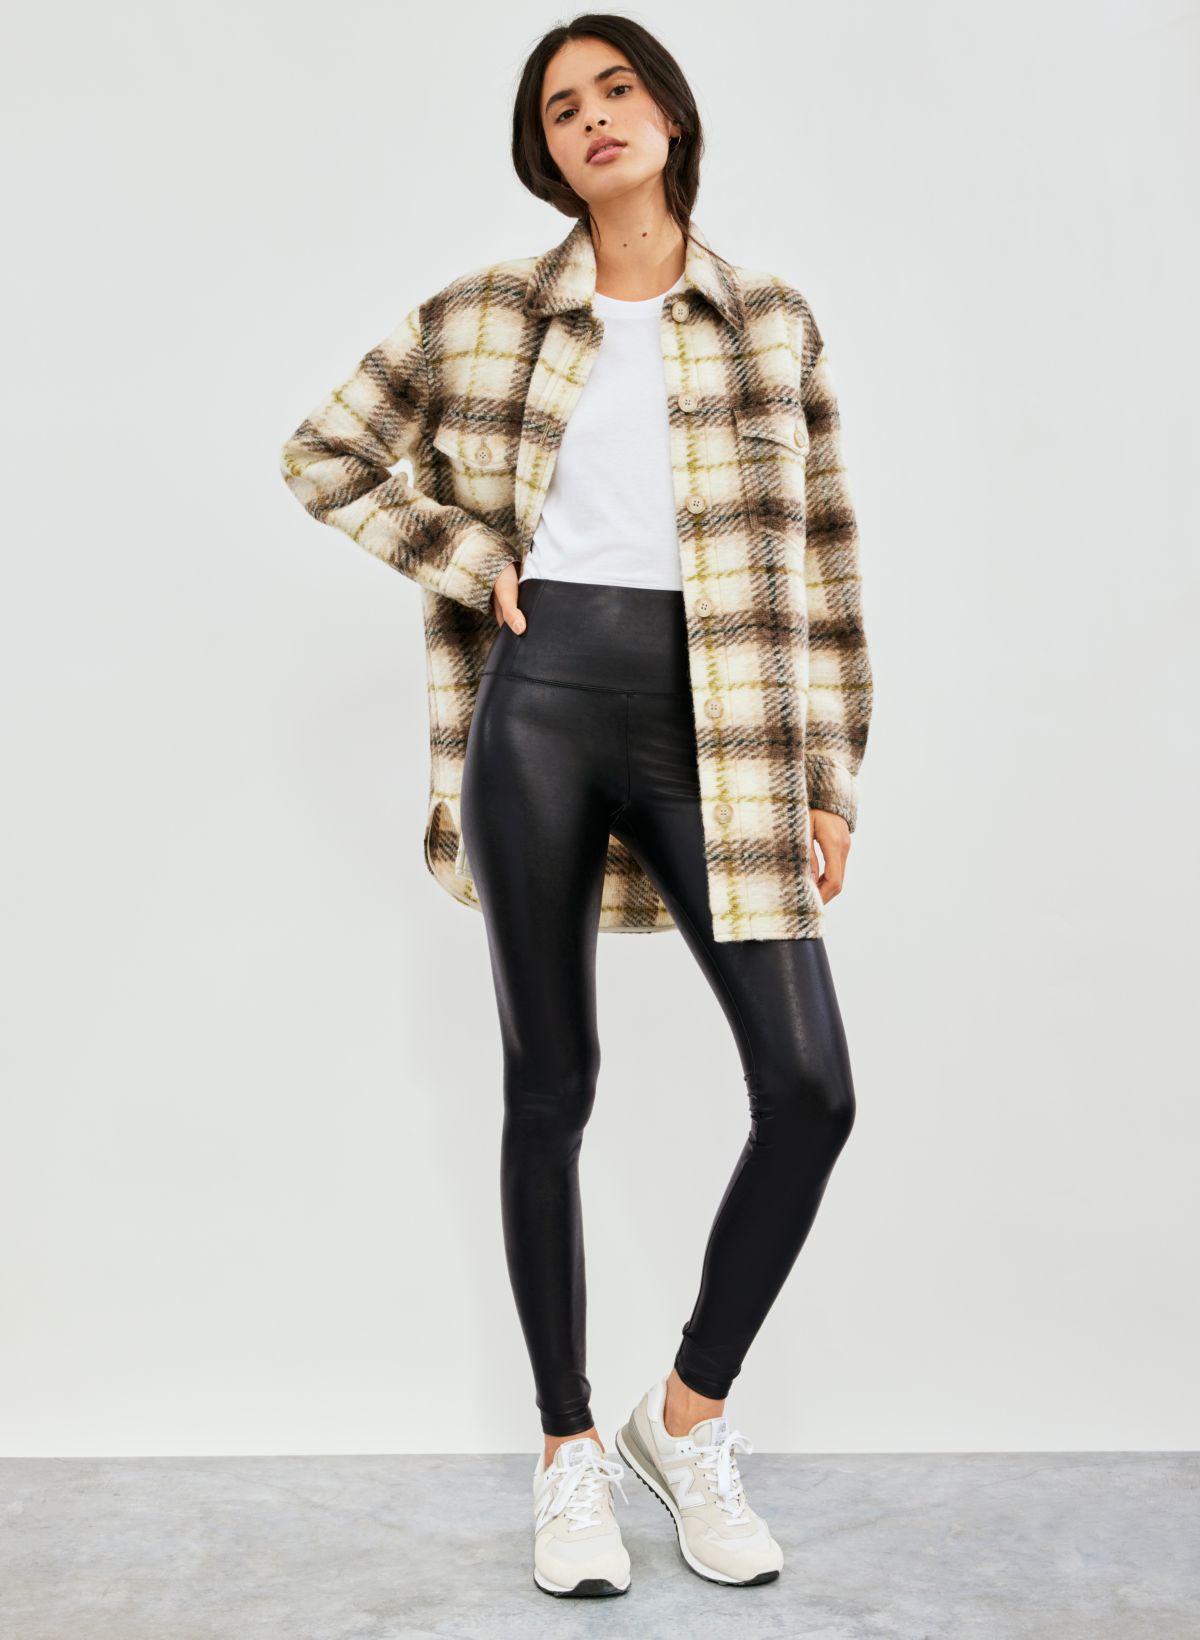 How To Style The Aritzia Wilfred Free Daria Pant